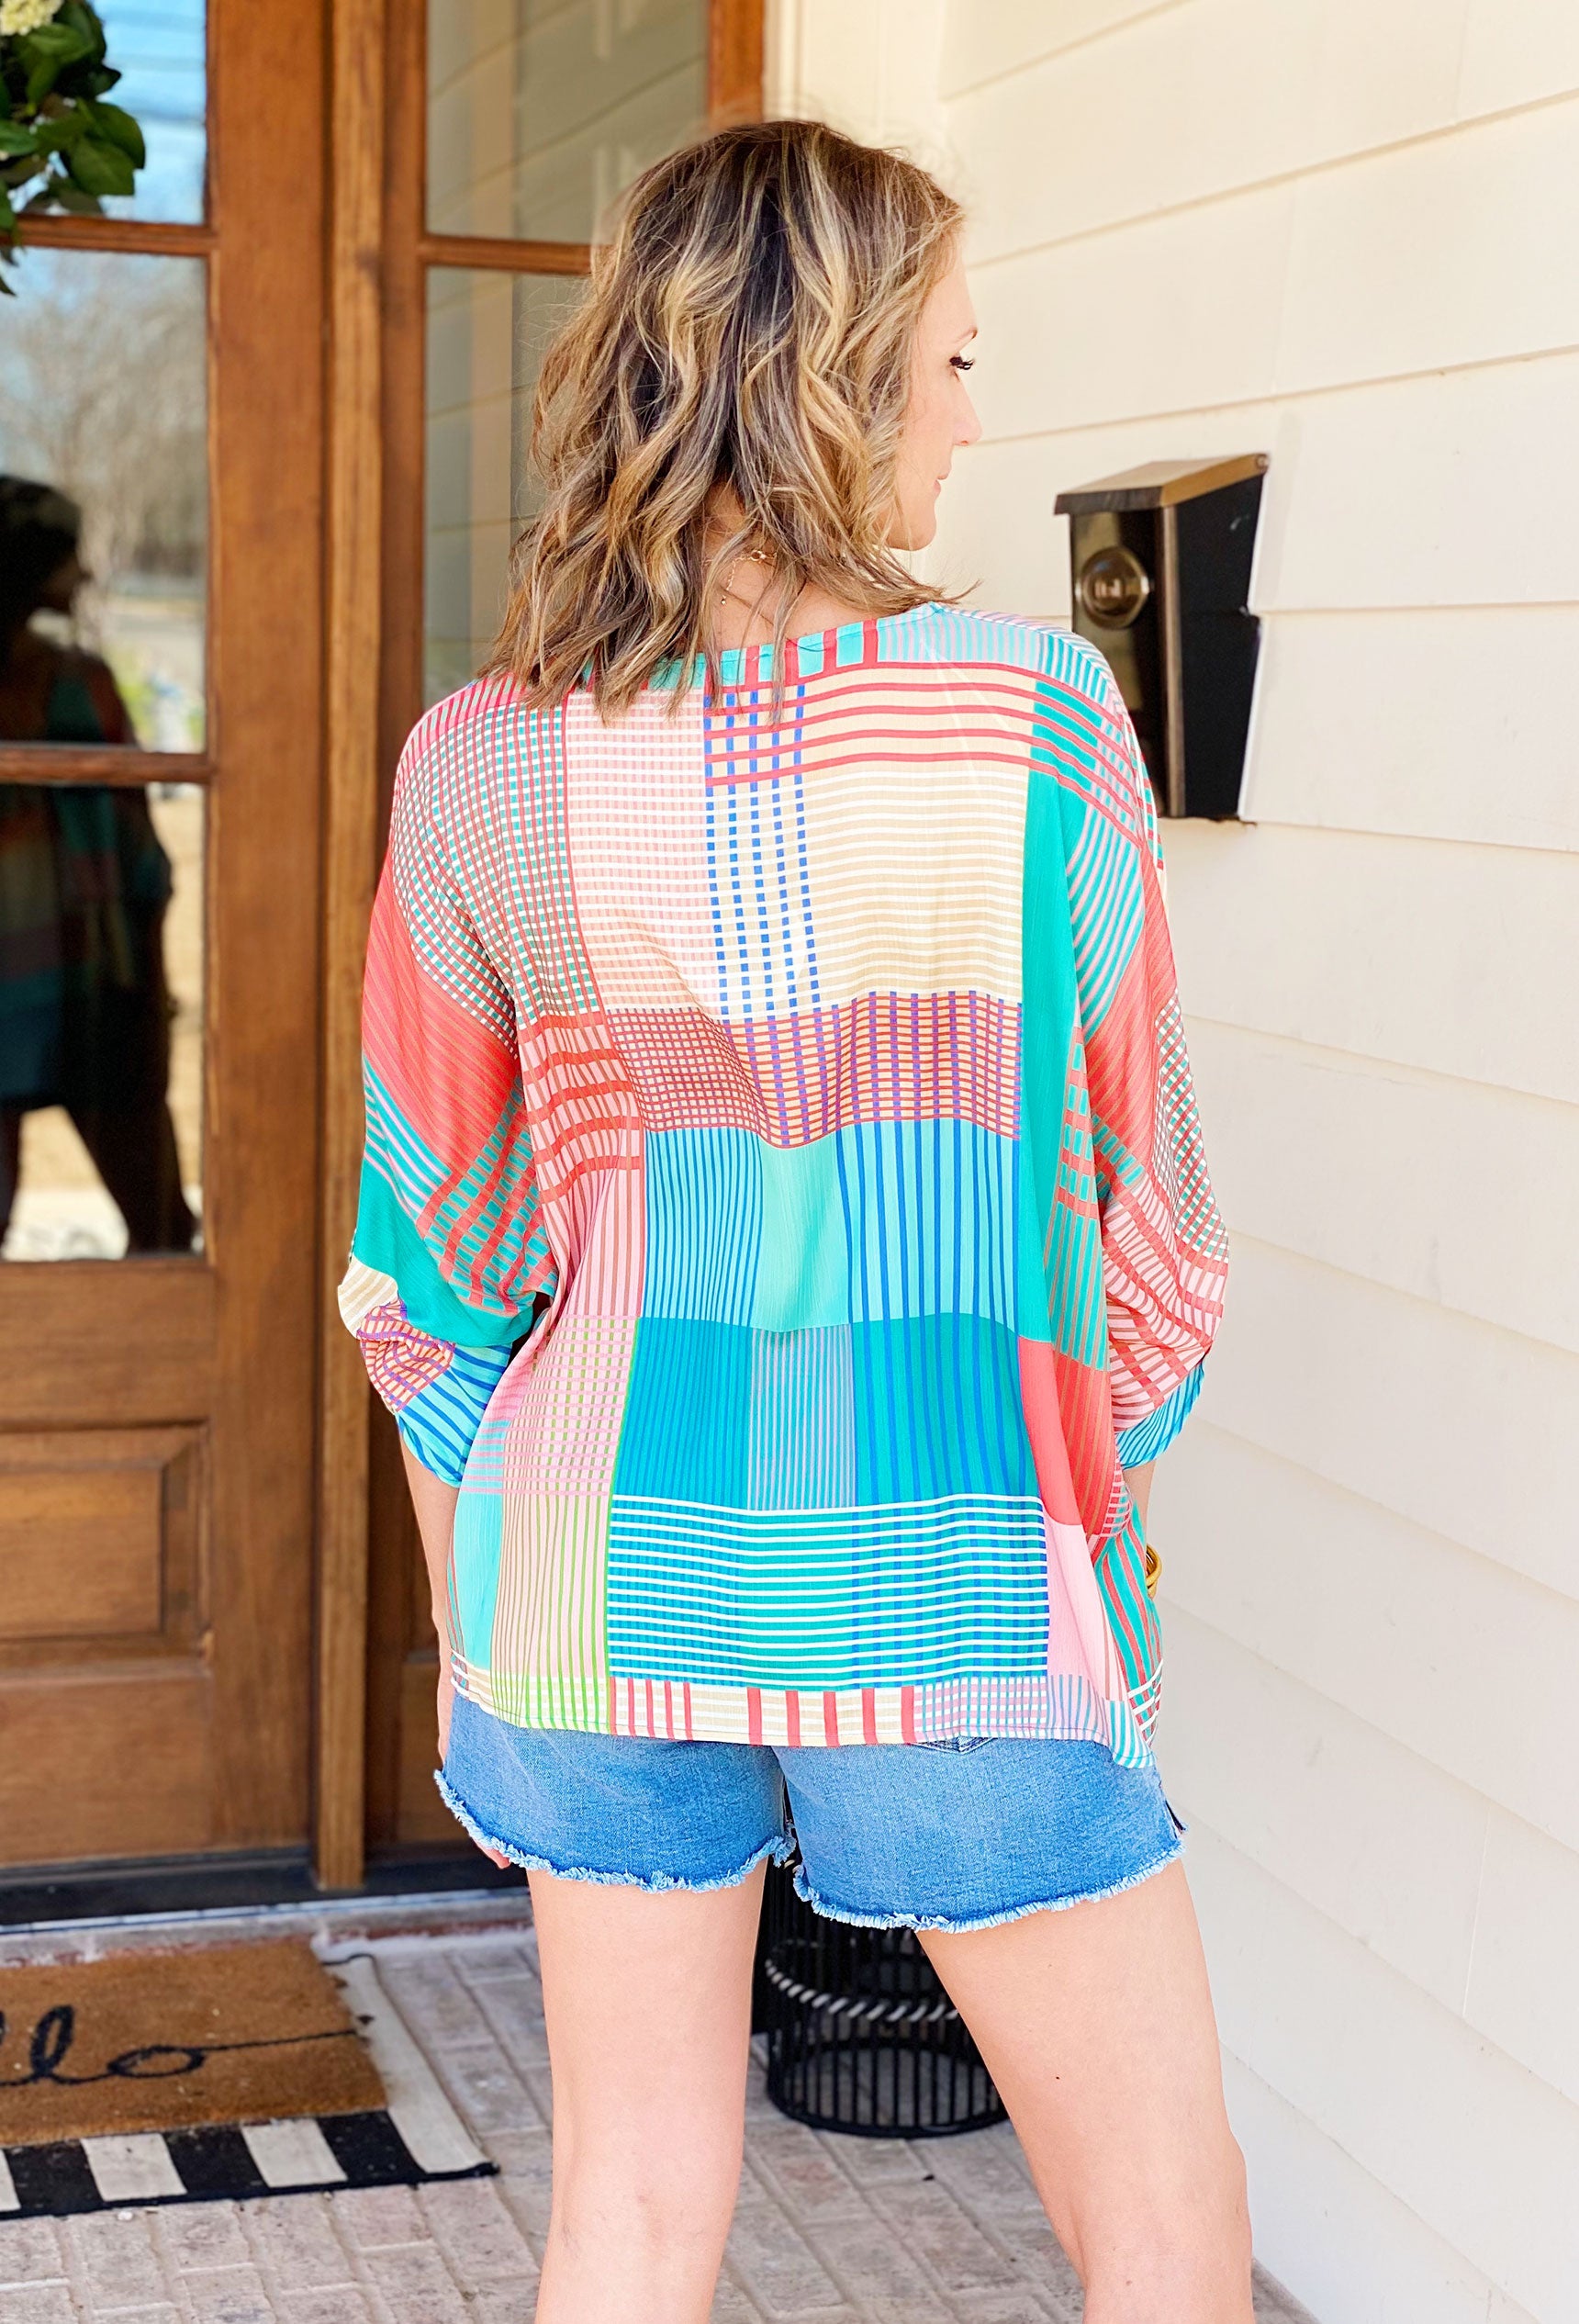 Just My Stripe Blouse, v-neck blouse with different colored striped all over shirt